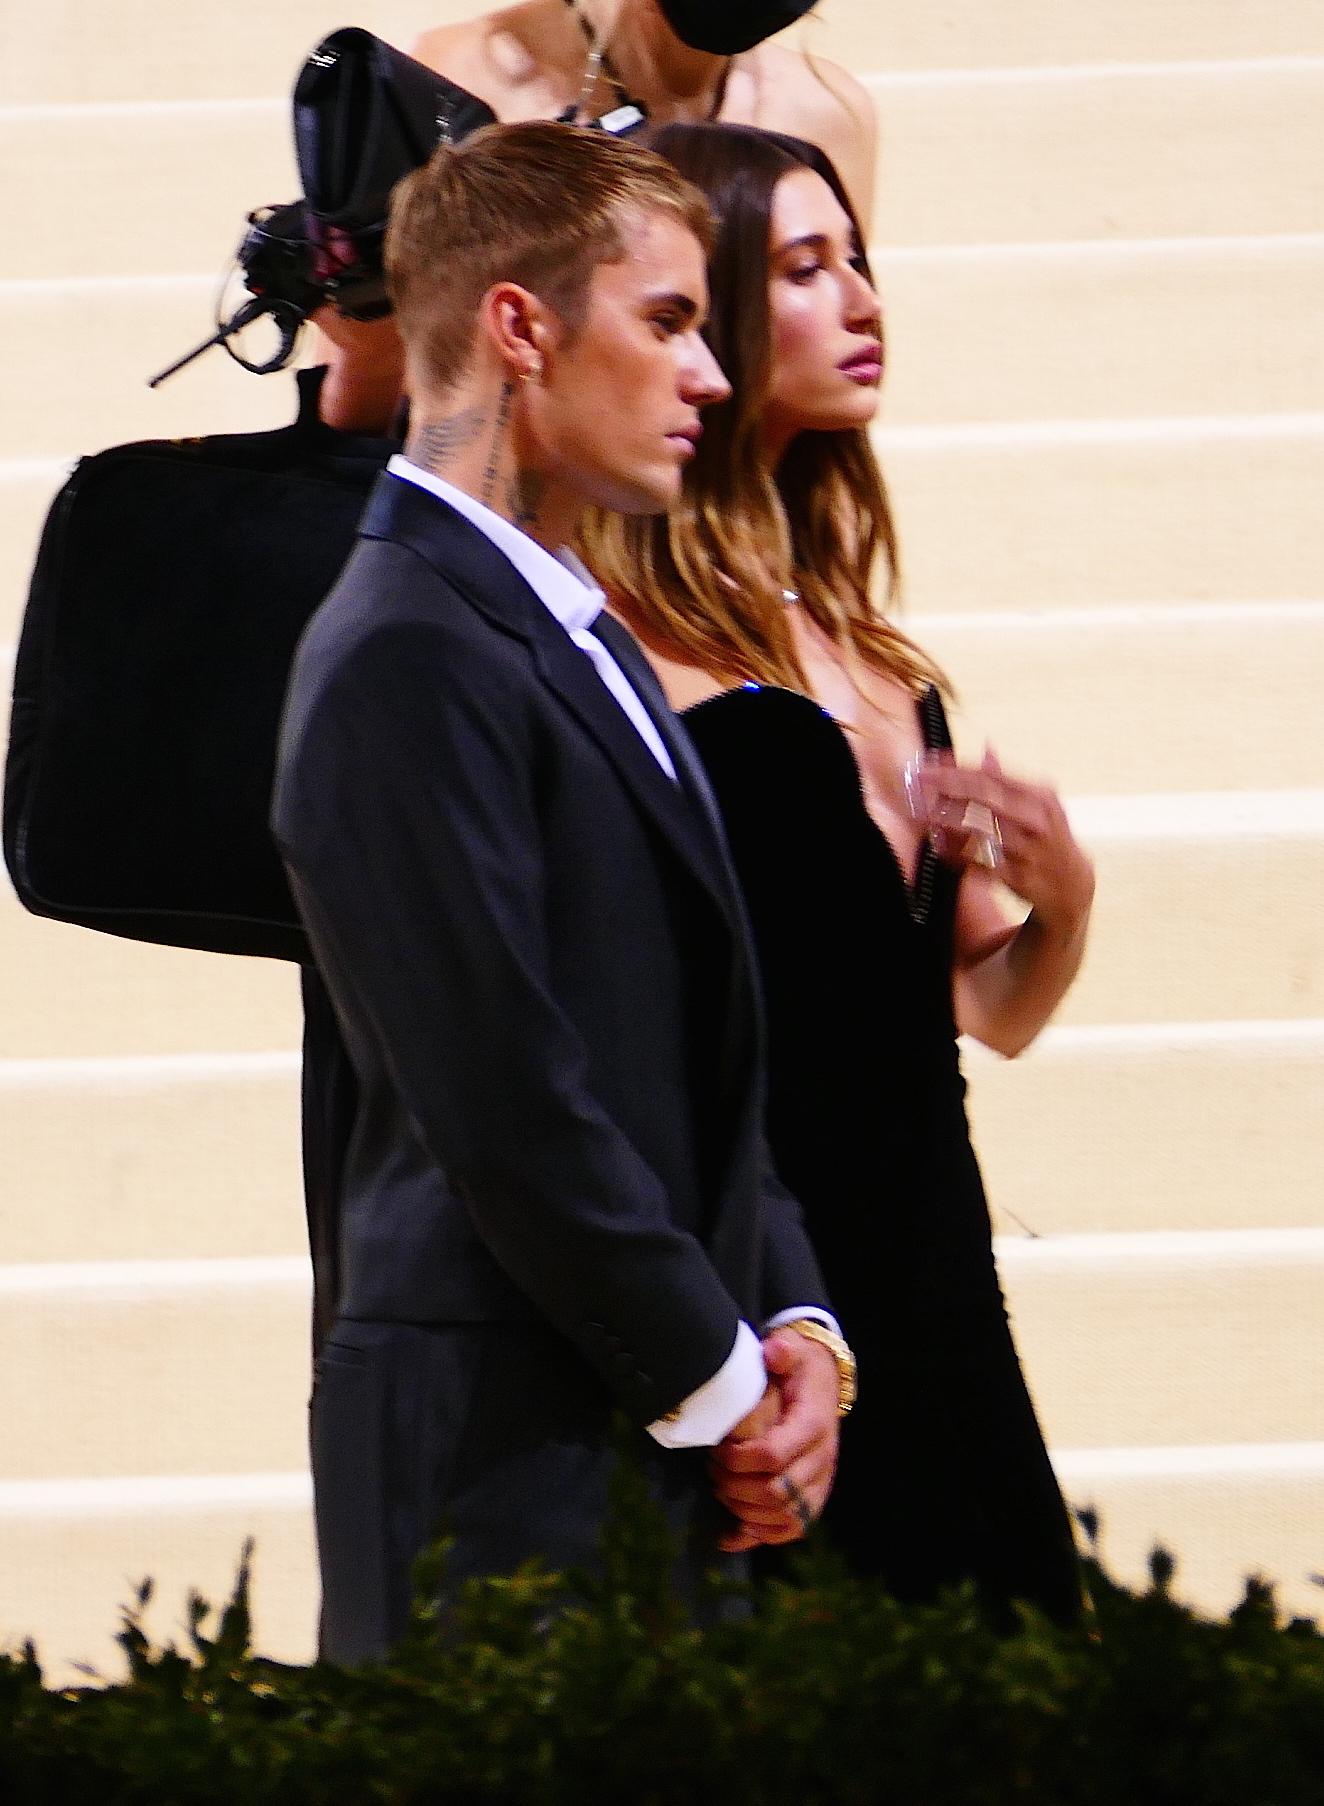 Justin Bieber and wife Hailey have a Mr&Mrs. Smith type moment as they show PDA at the Met Gala in NYC